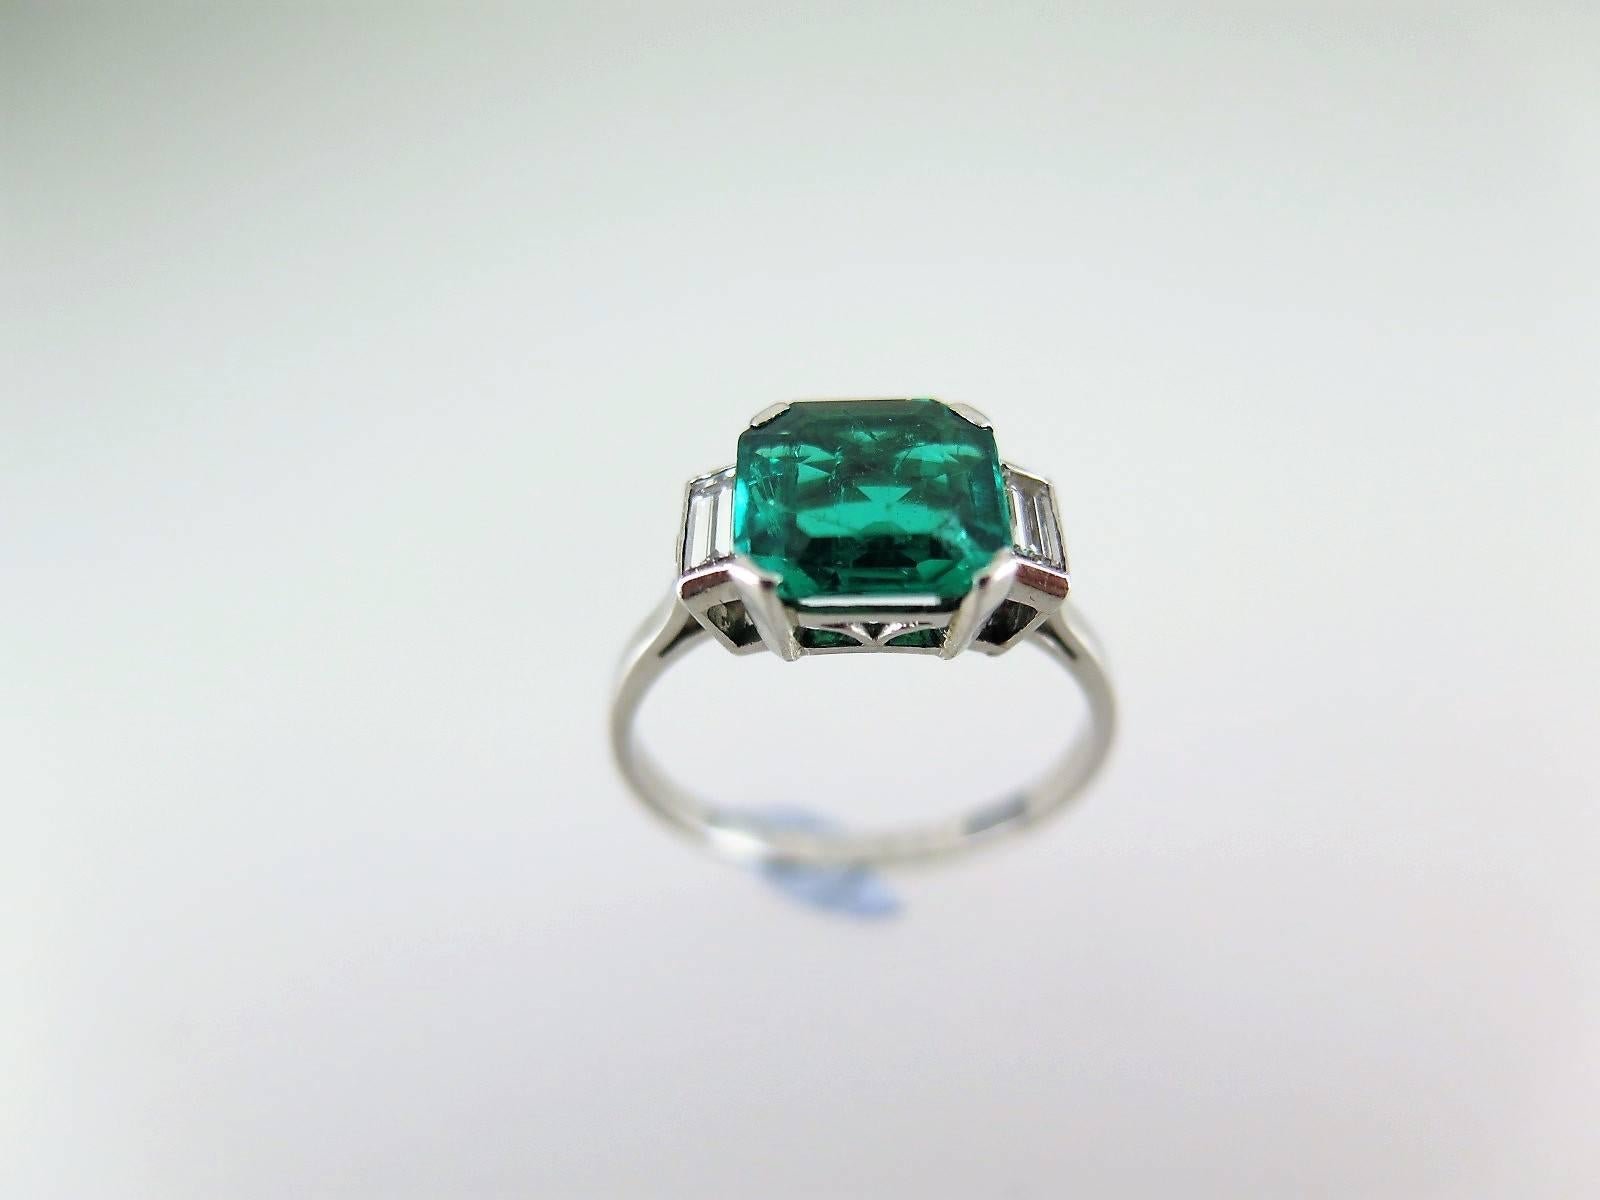 Claw-set with a step-cut emerald weighing 1.93cts between baguette diamond shoulders, mounted in platinum, accompanied by GCS certificate stating that the emerald is Colombian, size P (US size 8), can be resized to order  